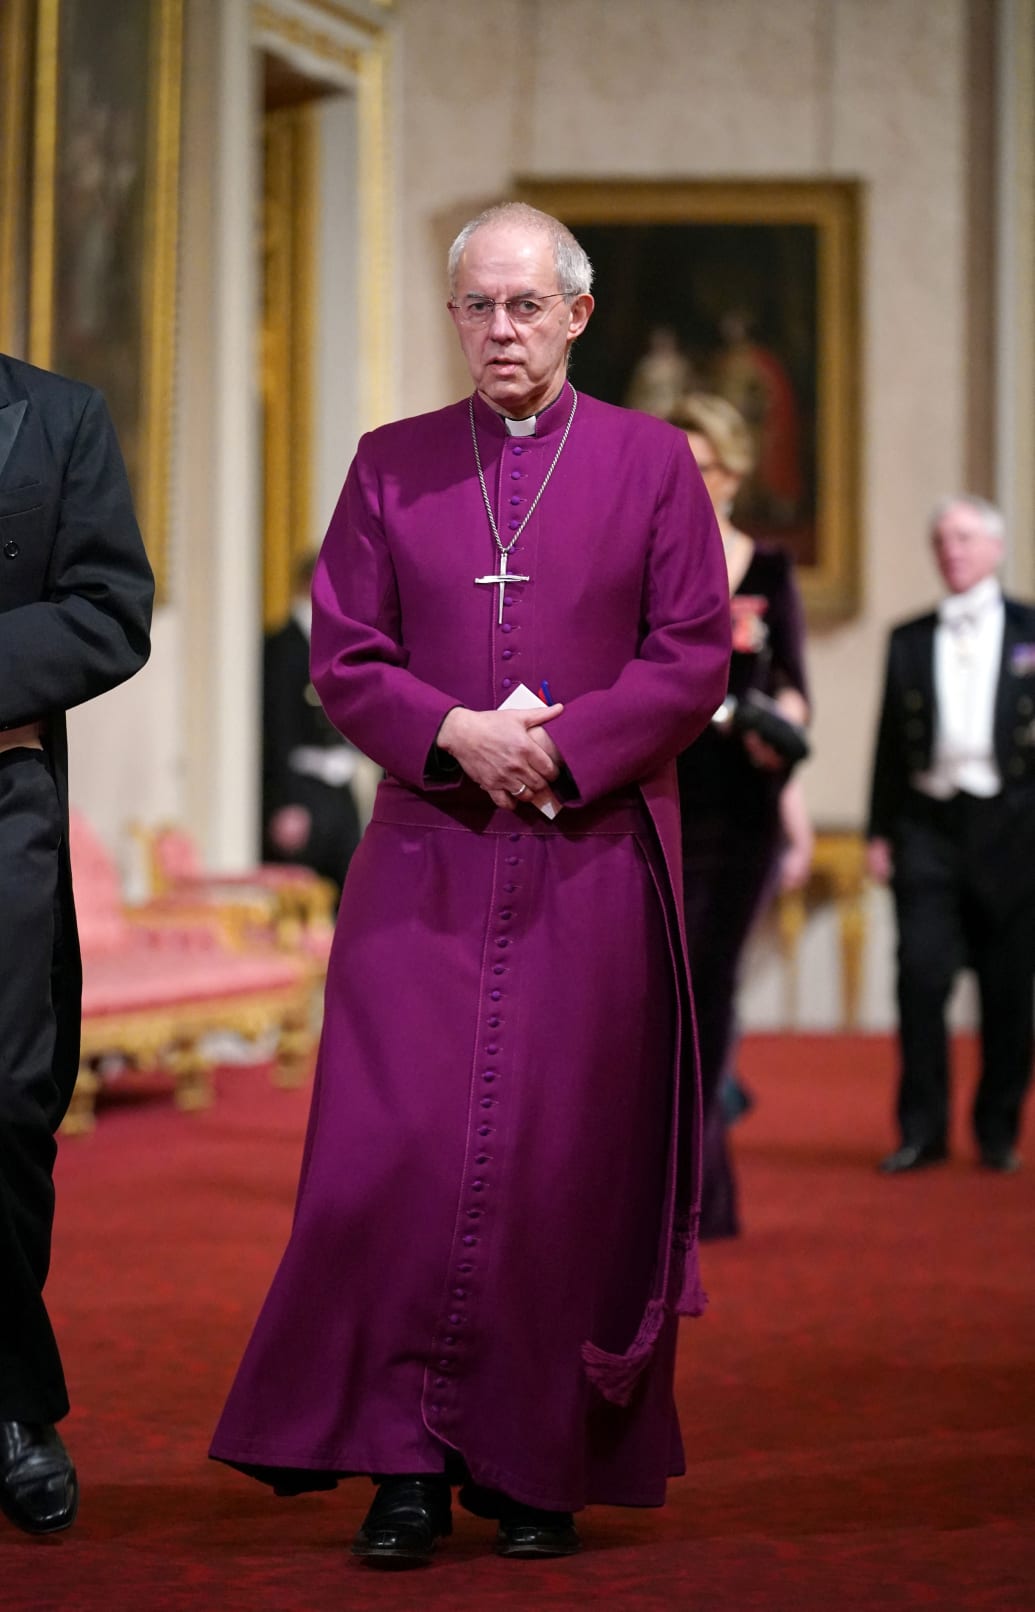 The Archbishop of Canterbury, the Most Reverend Justin Welby, attends the State Banquet during the South Korean President state visit, at Buckingham Palace in London, Britain November 21, 2023.